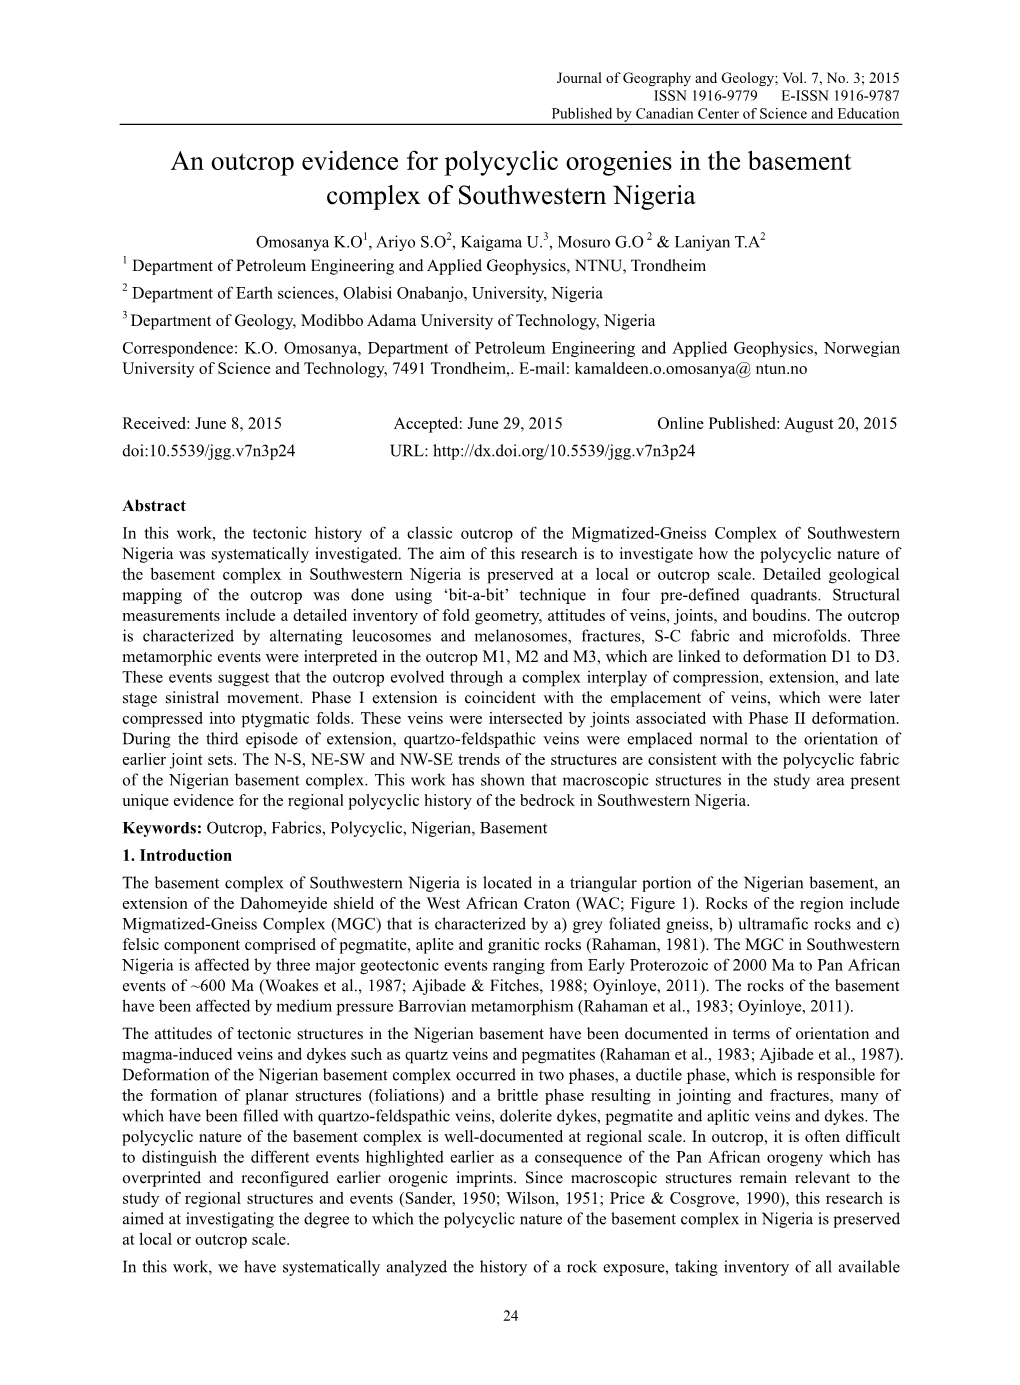 An Outcrop Evidence for Polycyclic Orogenies in the Basement Complex of Southwestern Nigeria